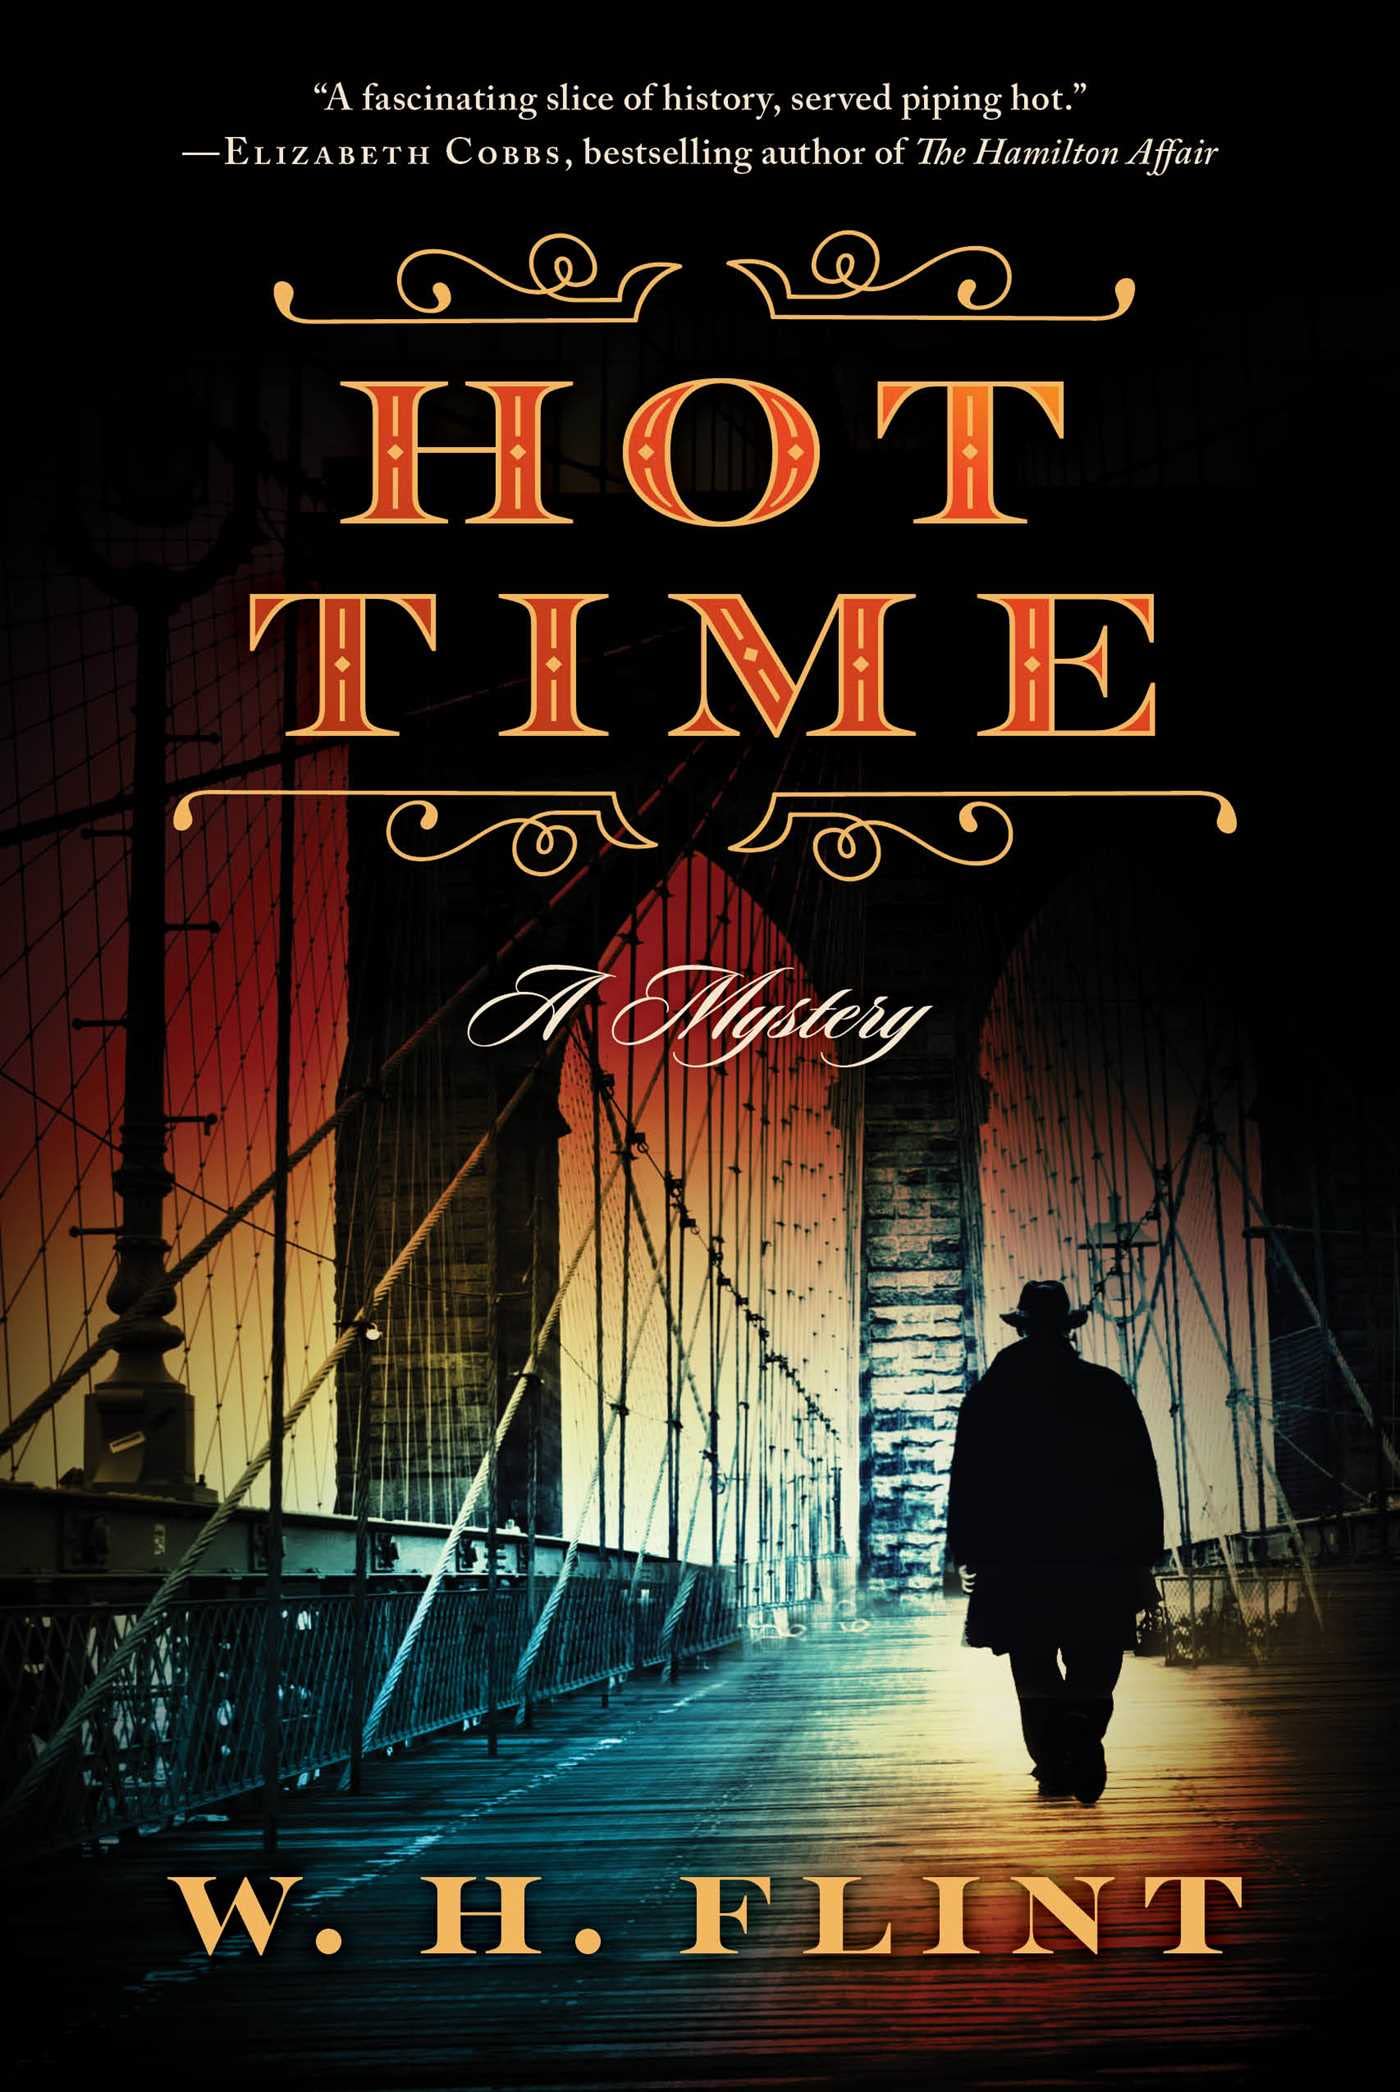 Image for "Hot Time"